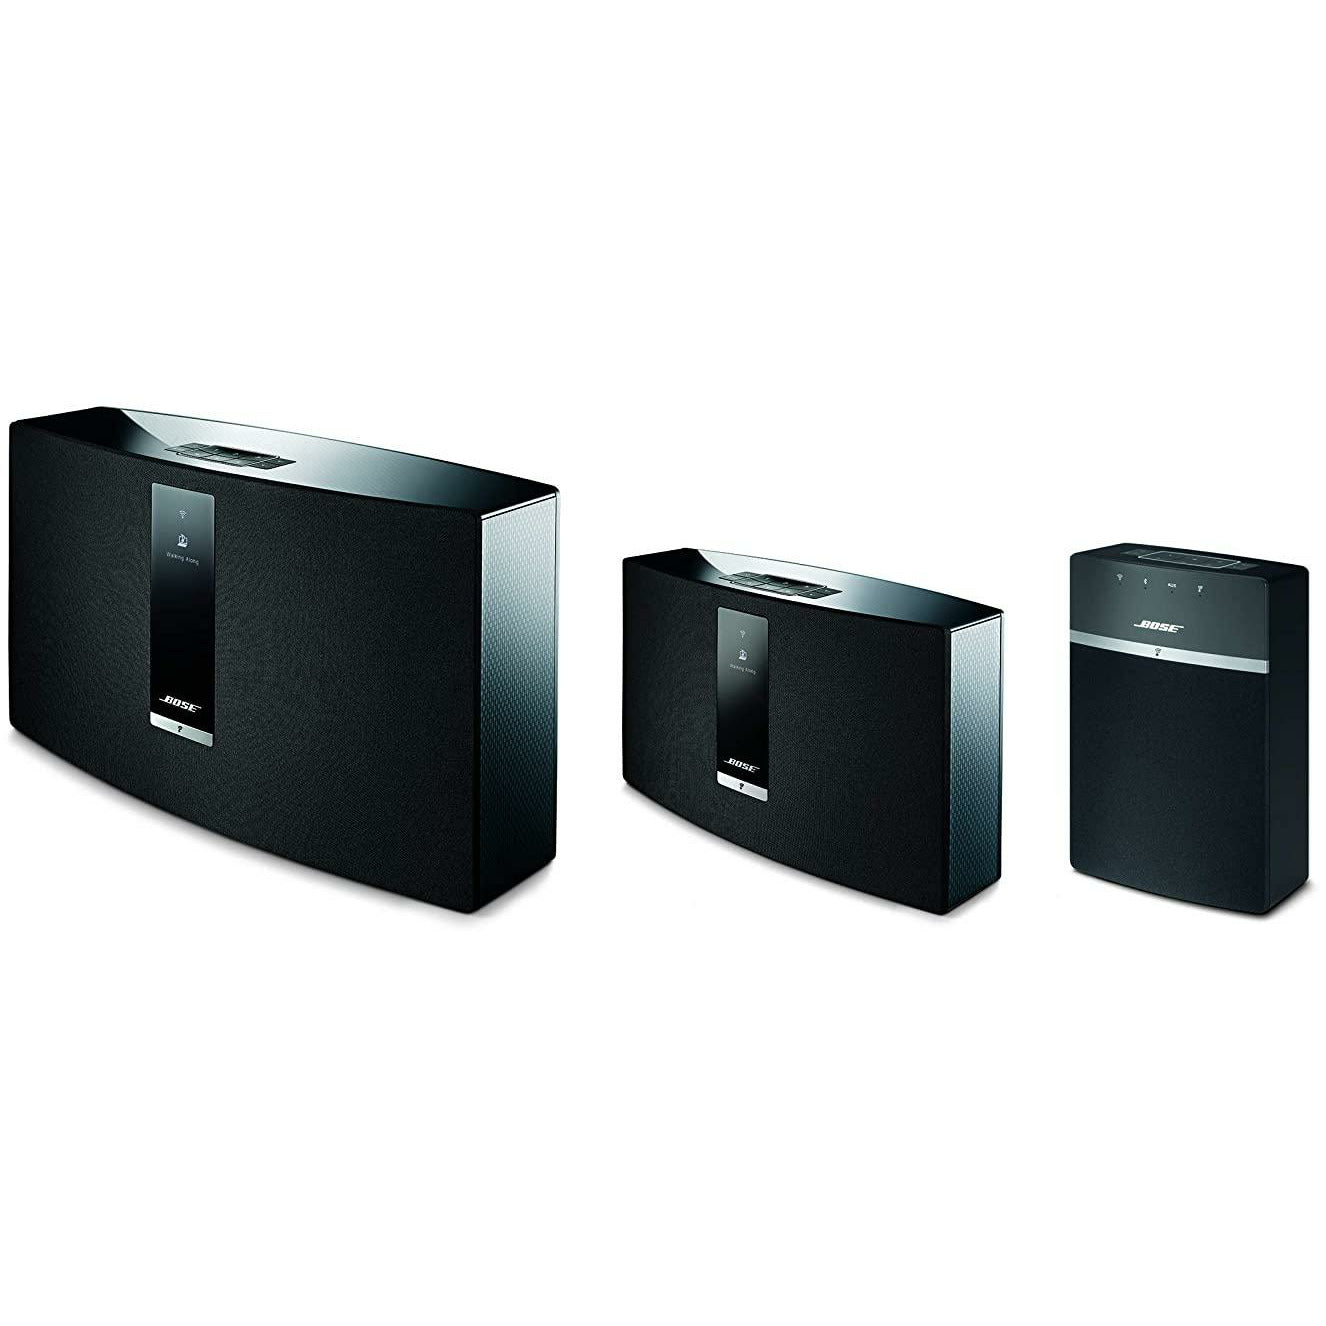 Bose SoundTouch 20 Series III - スピーカー